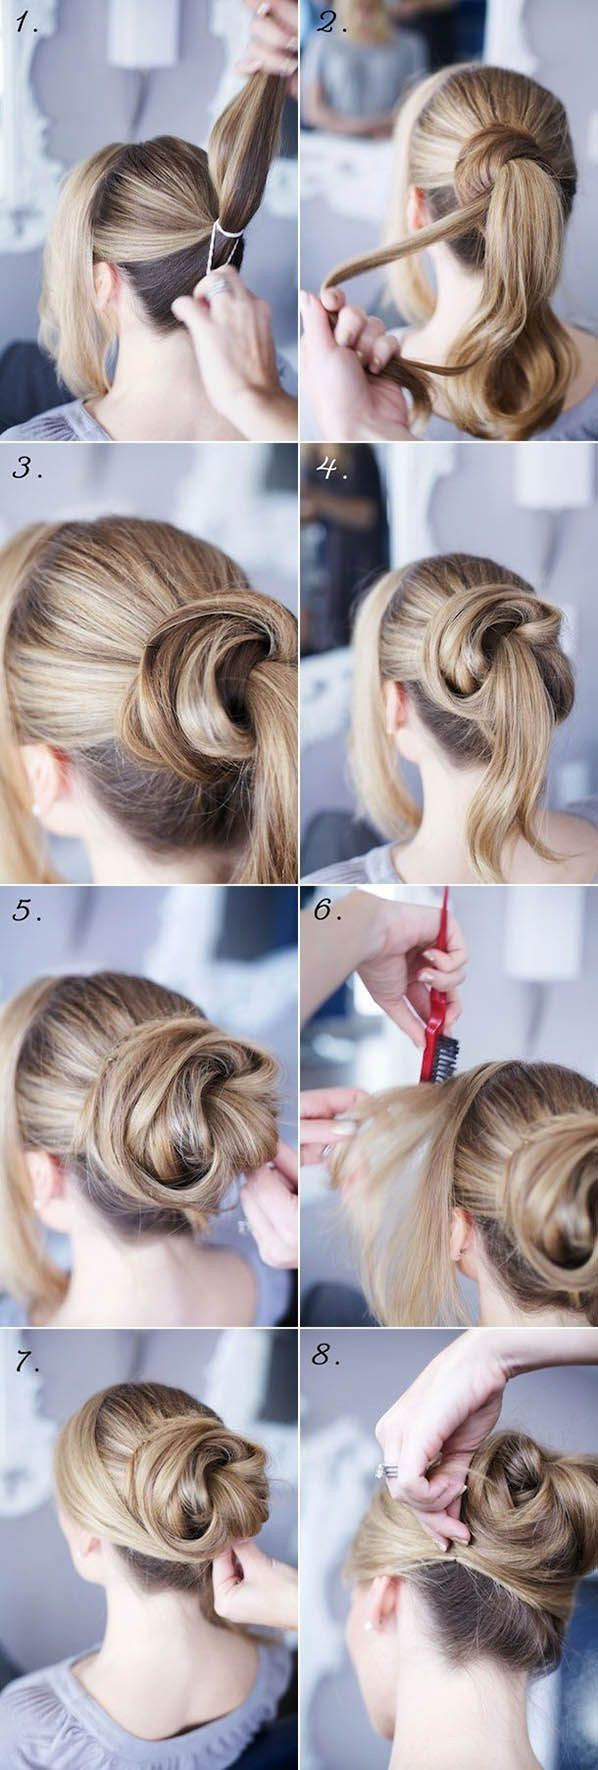 Cool Hairstyles Step By Step
 awesome Cool and Easy Party Hairstyle Step By Step for